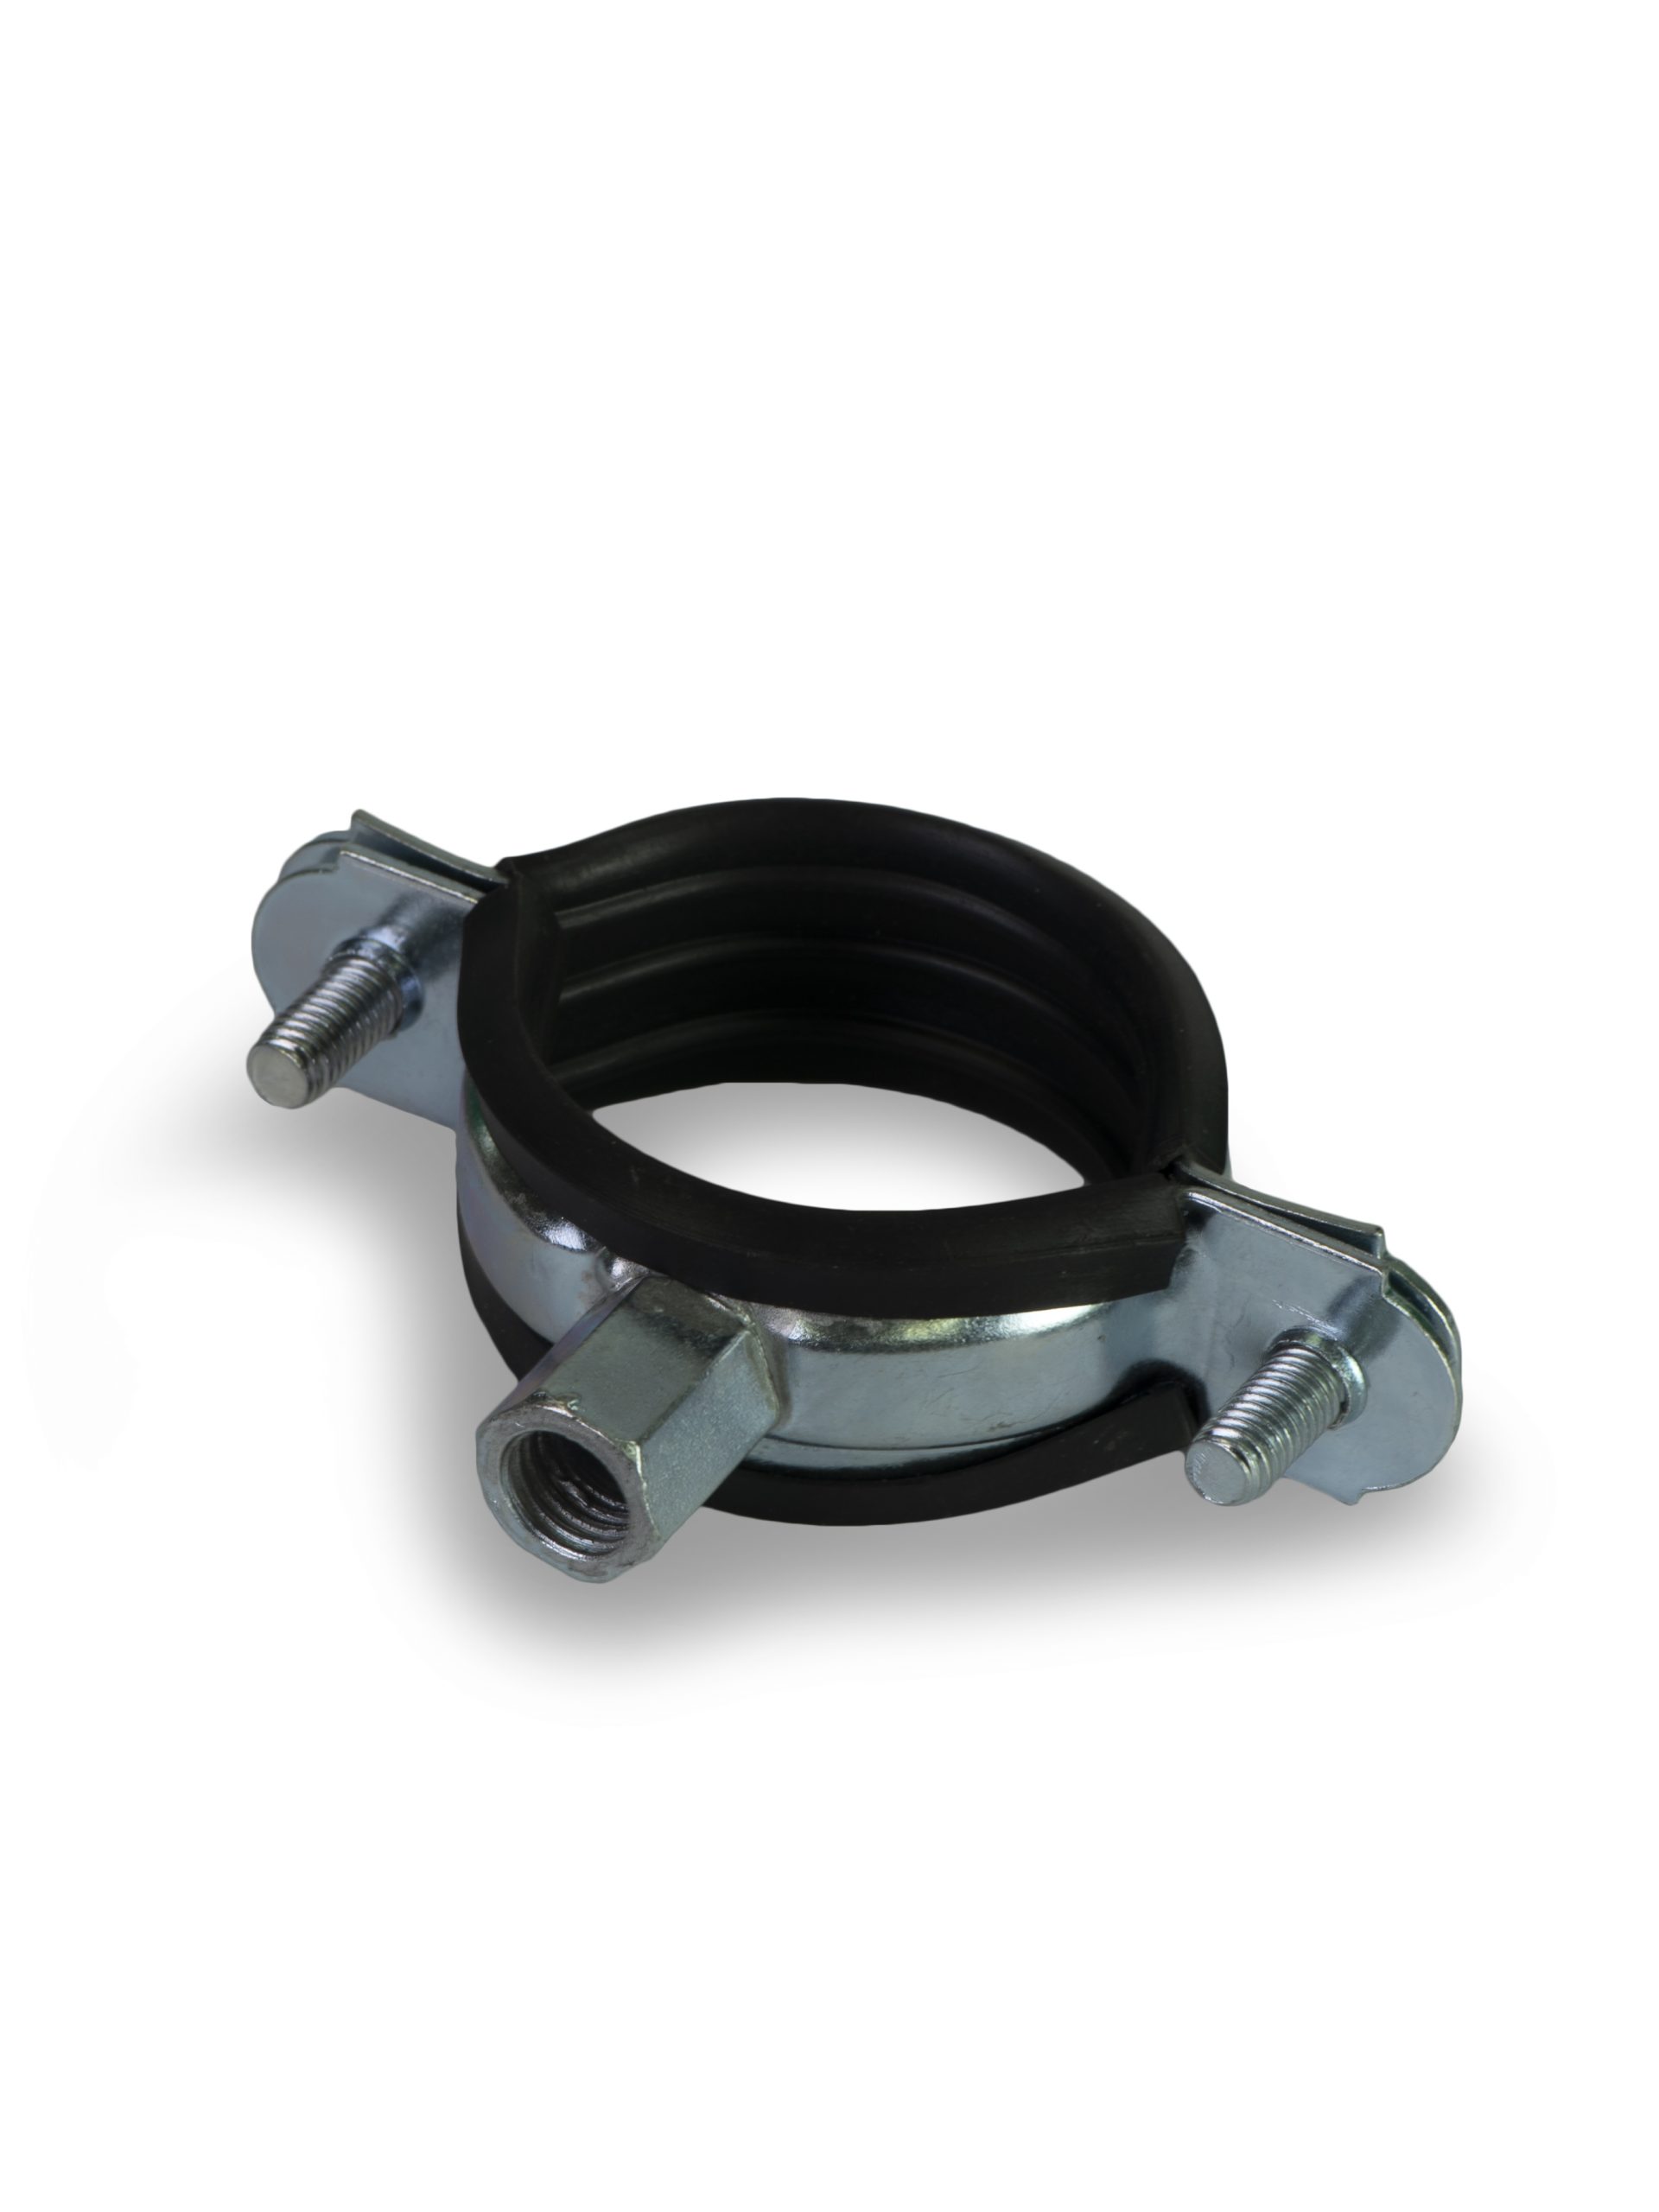 RUBBER LINED SPLIT CLAMP 1 1/4 Inches , DIAMOND from Gas Equipment Company Llc Abu Dhabi, UNITED ARAB EMIRATES